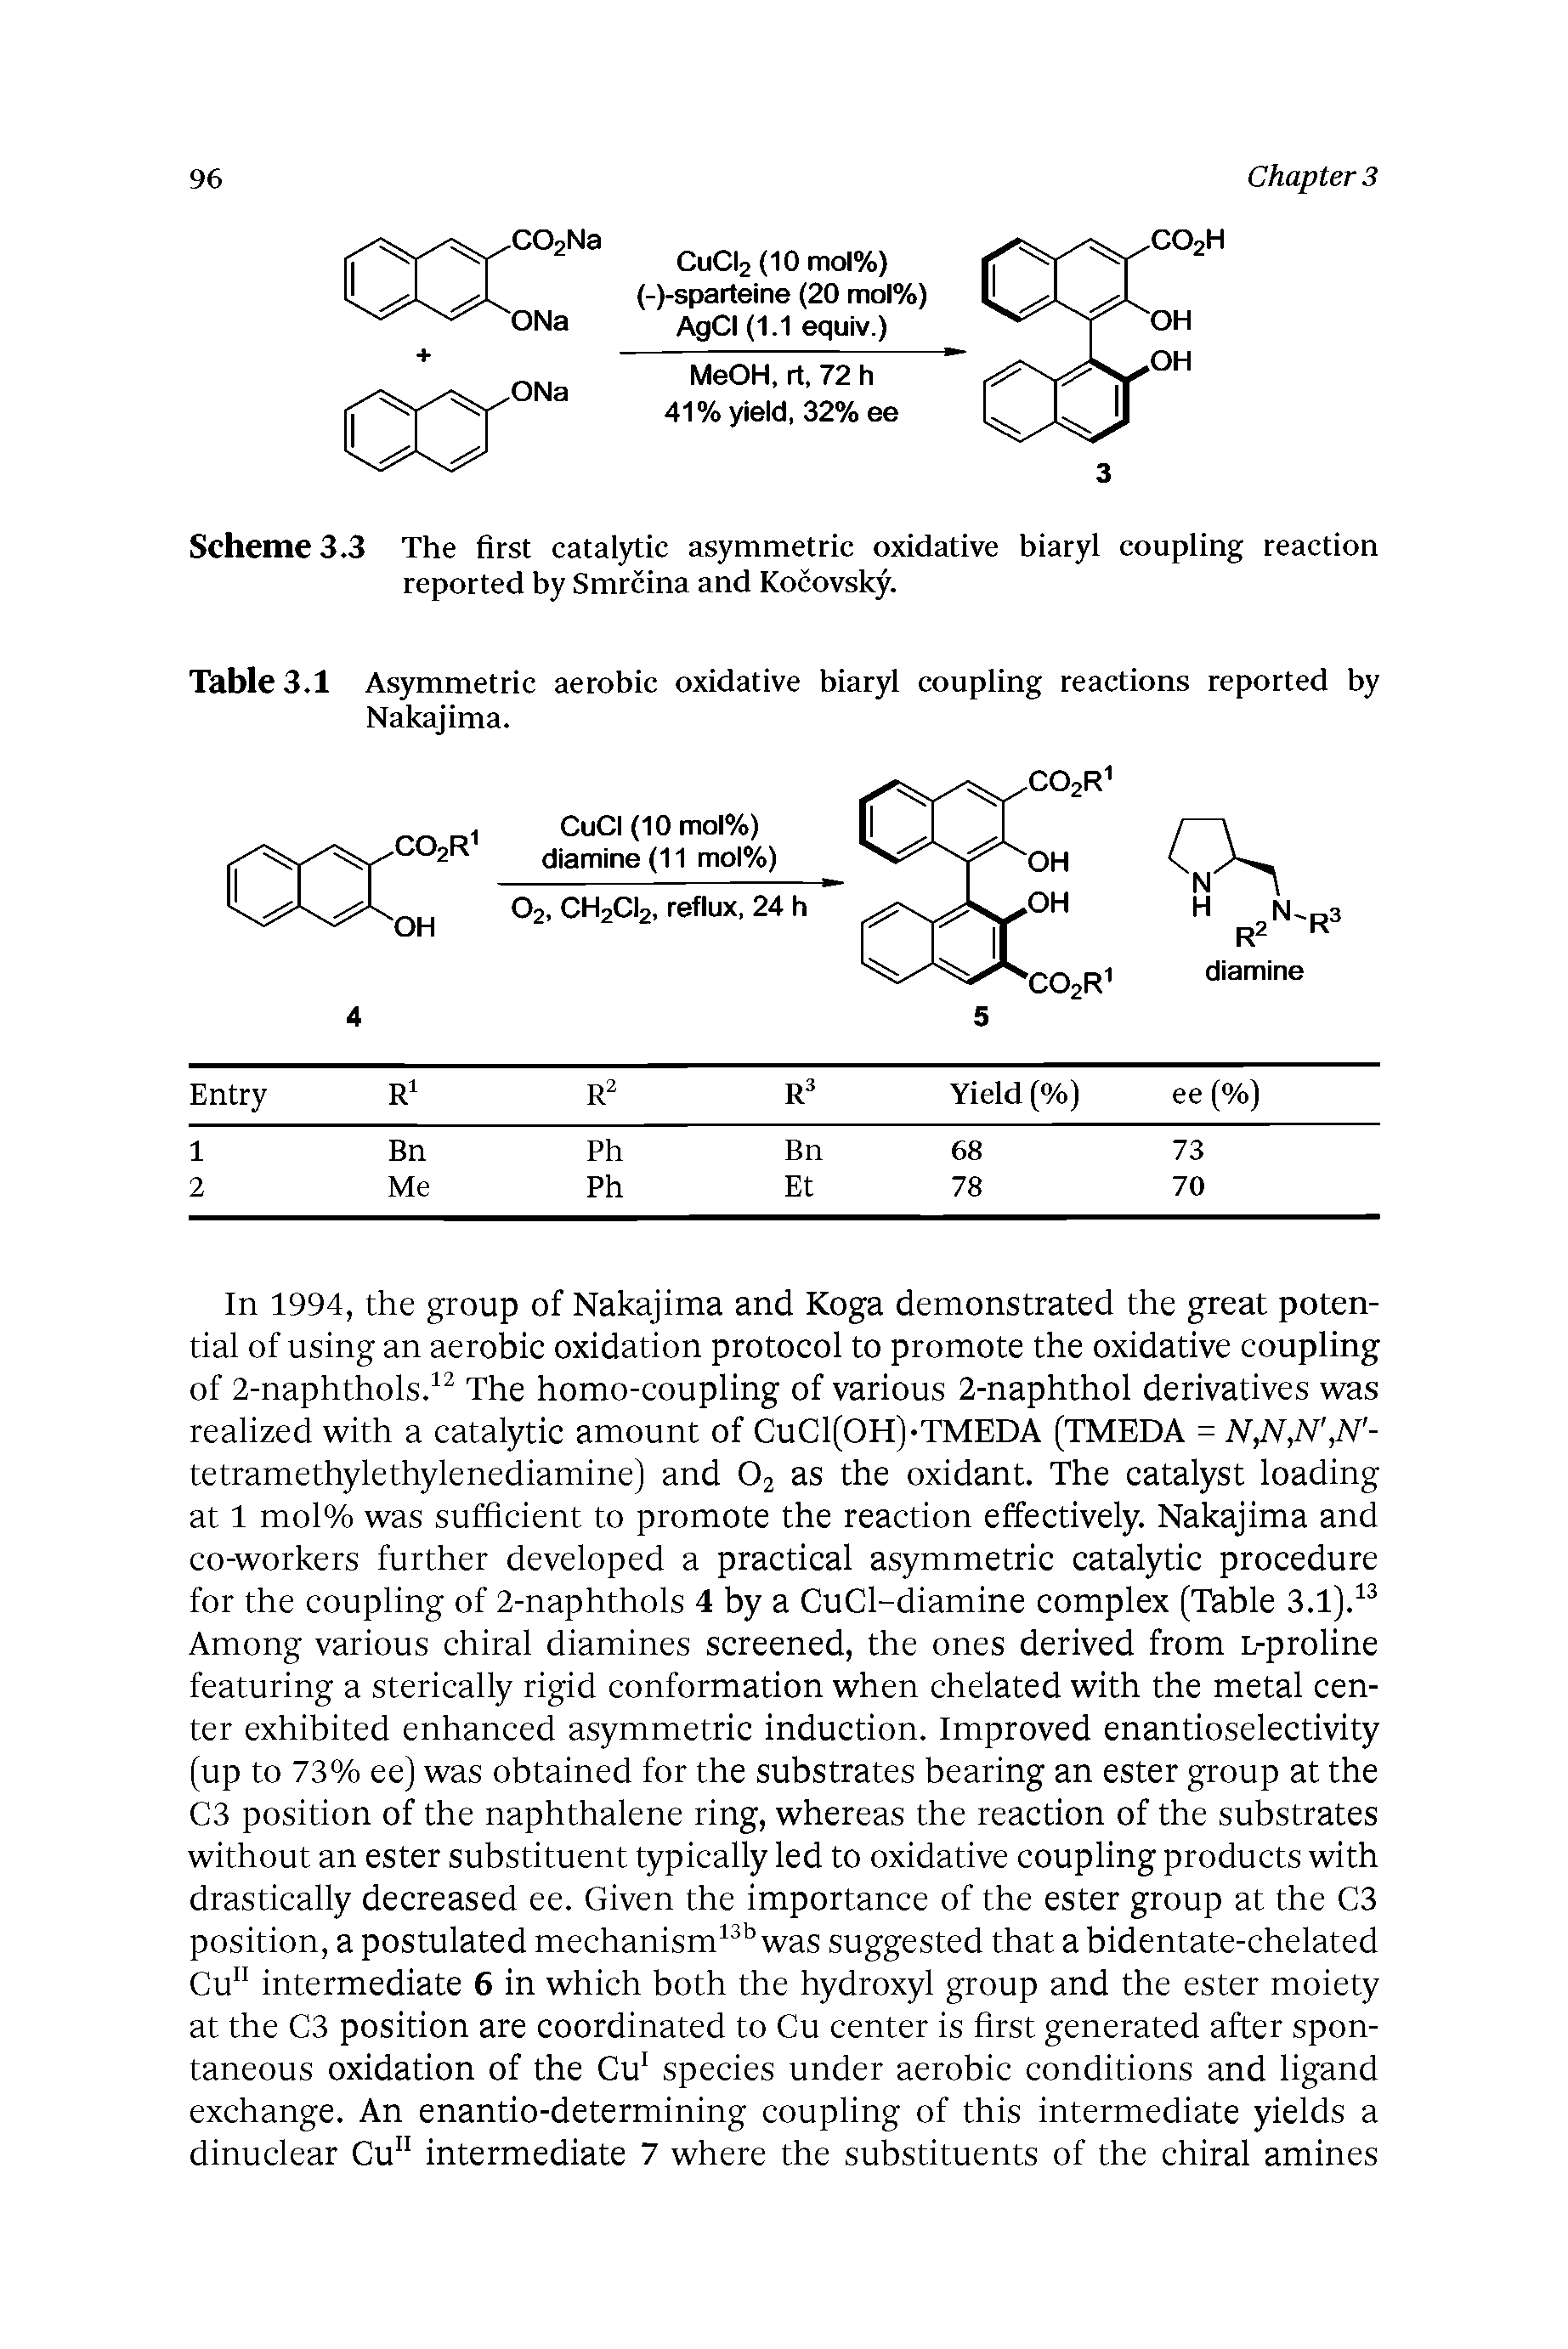 Table 3.1 Asymmetric aerobic oxidative biaryl coupling reactions reported by Nakajima.